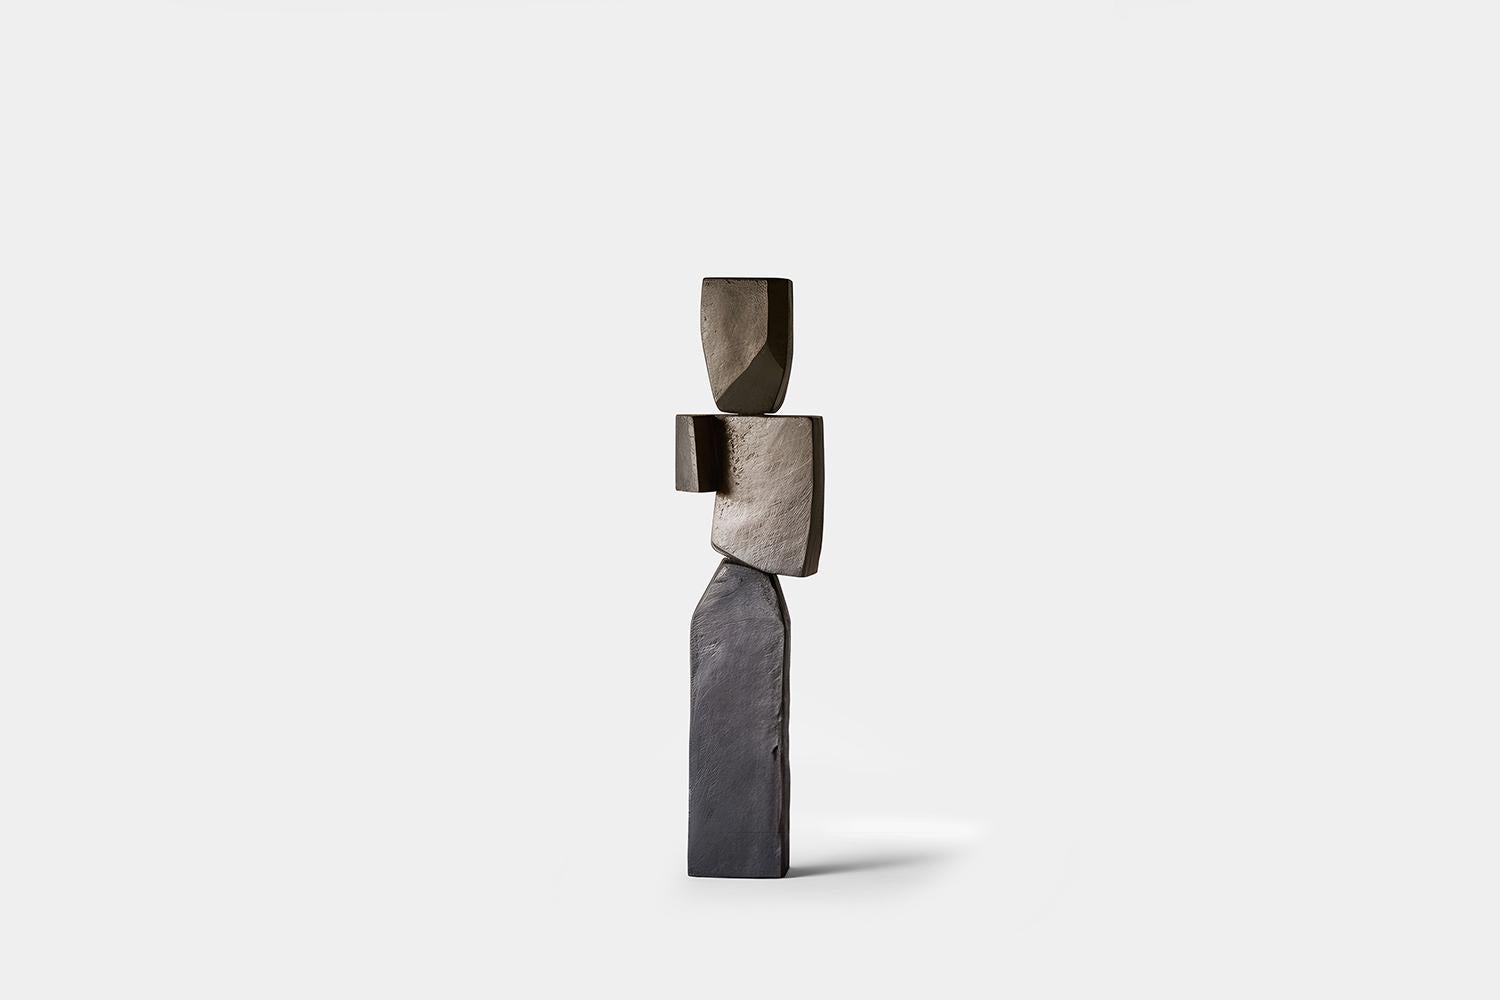 Biomorphic Carved Wood Sculpture in the style of Isamu Noguchi, Unseen Force 17 by Joel Escalona



This monolithic sculpture, designed by the talented Artist Joel Escalona, is a towering example of beauty in craftsmanship. Hand and digital machine